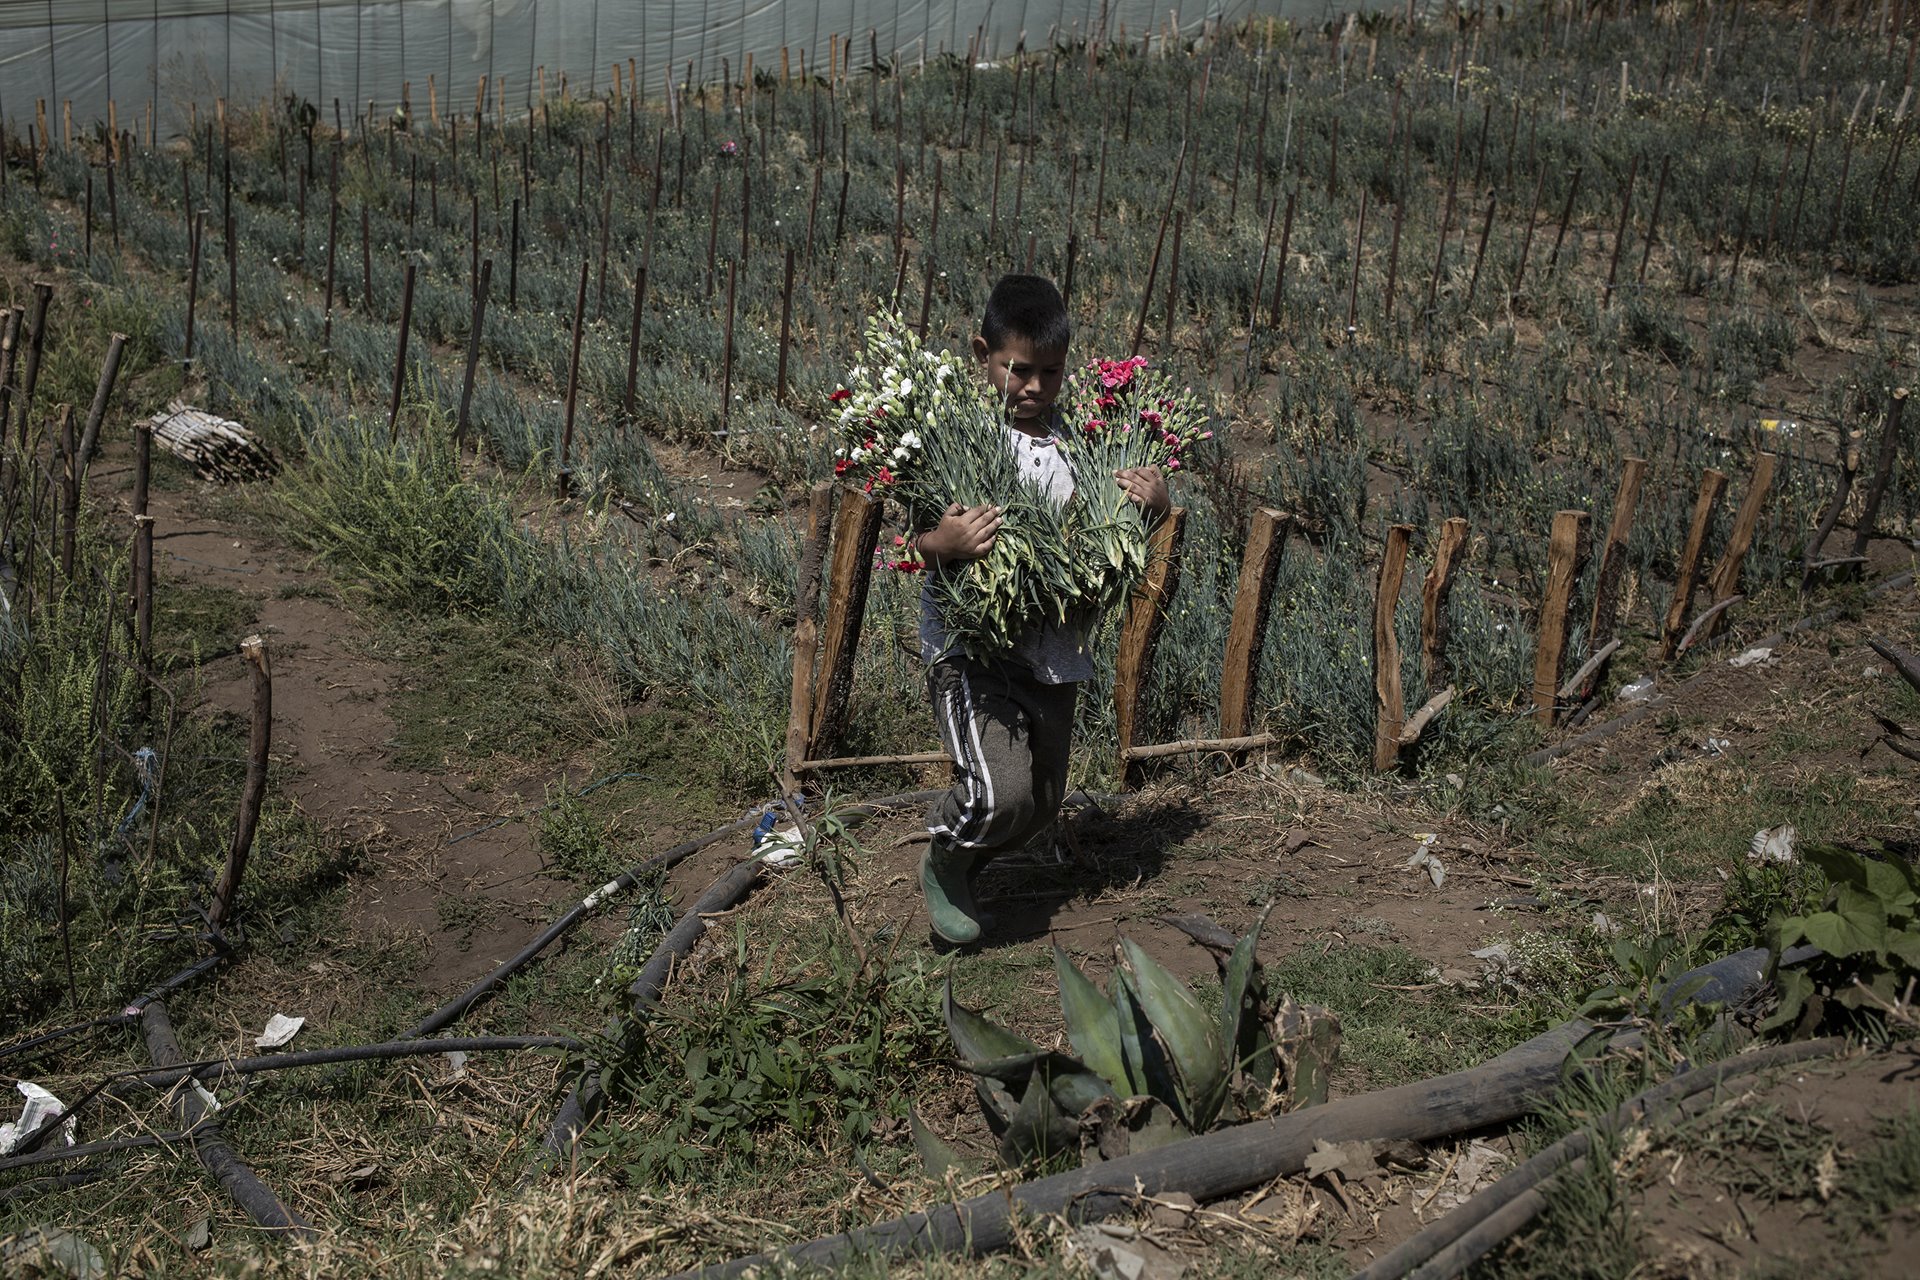 Josué (10) carries flowers on a plot belonging to his father, José Millán Guadarrama, in Villa Guerrero, Mexico. It is customary in the region for whole families to be involved in flower growing. Parents perform heavier work and spray crops, while younger family members help with the simpler activities such as carrying flowers.